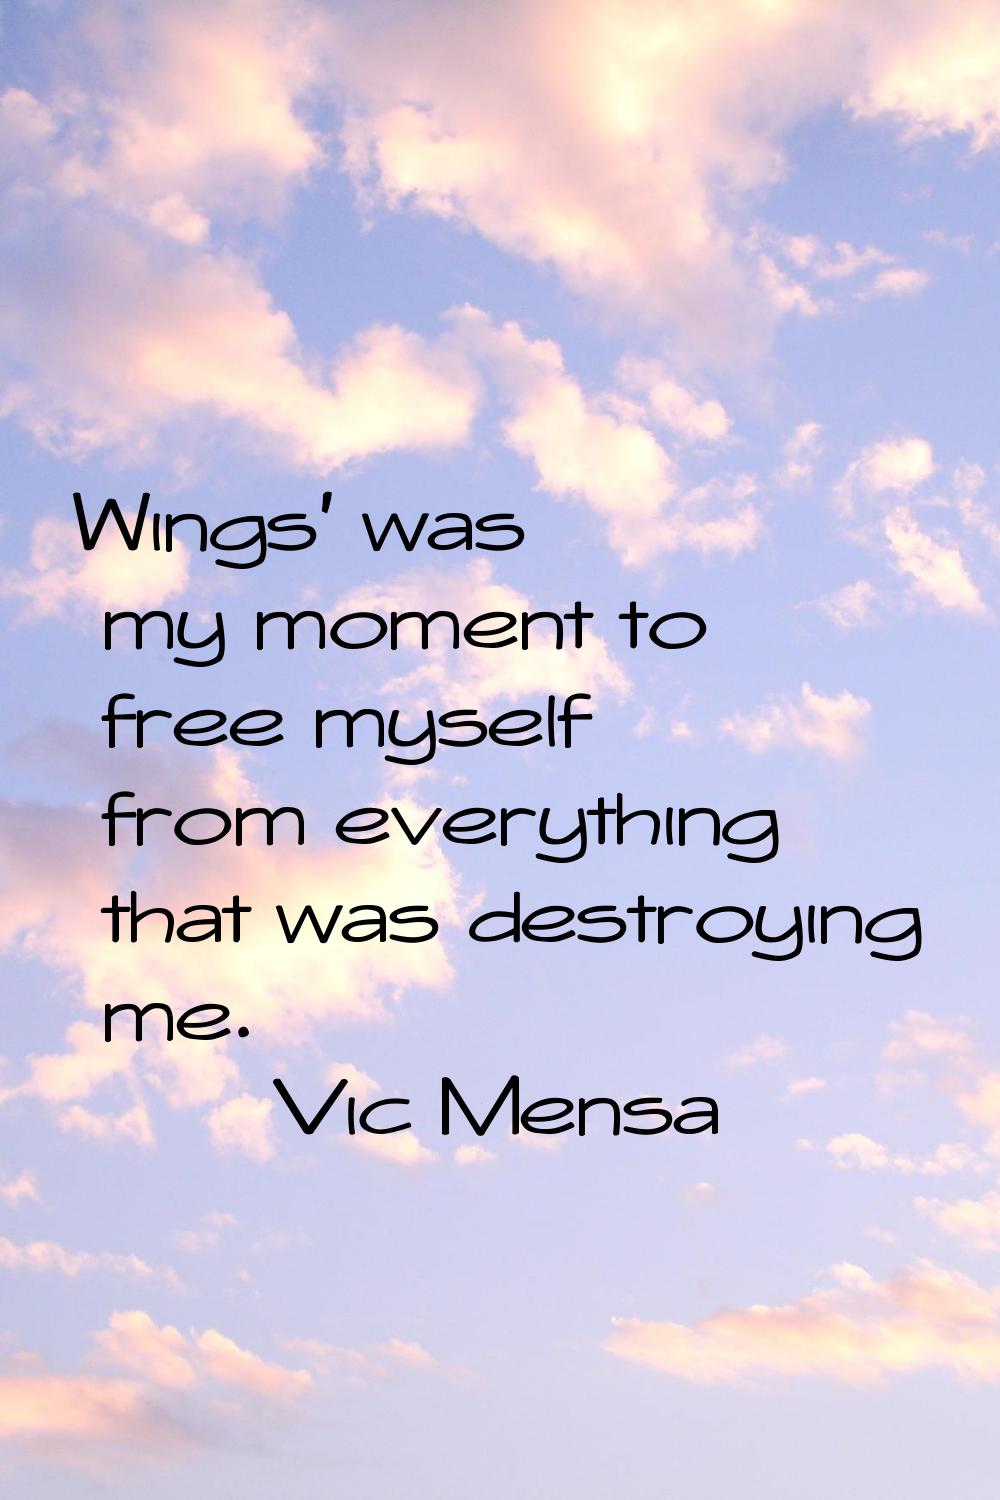 Wings' was my moment to free myself from everything that was destroying me.